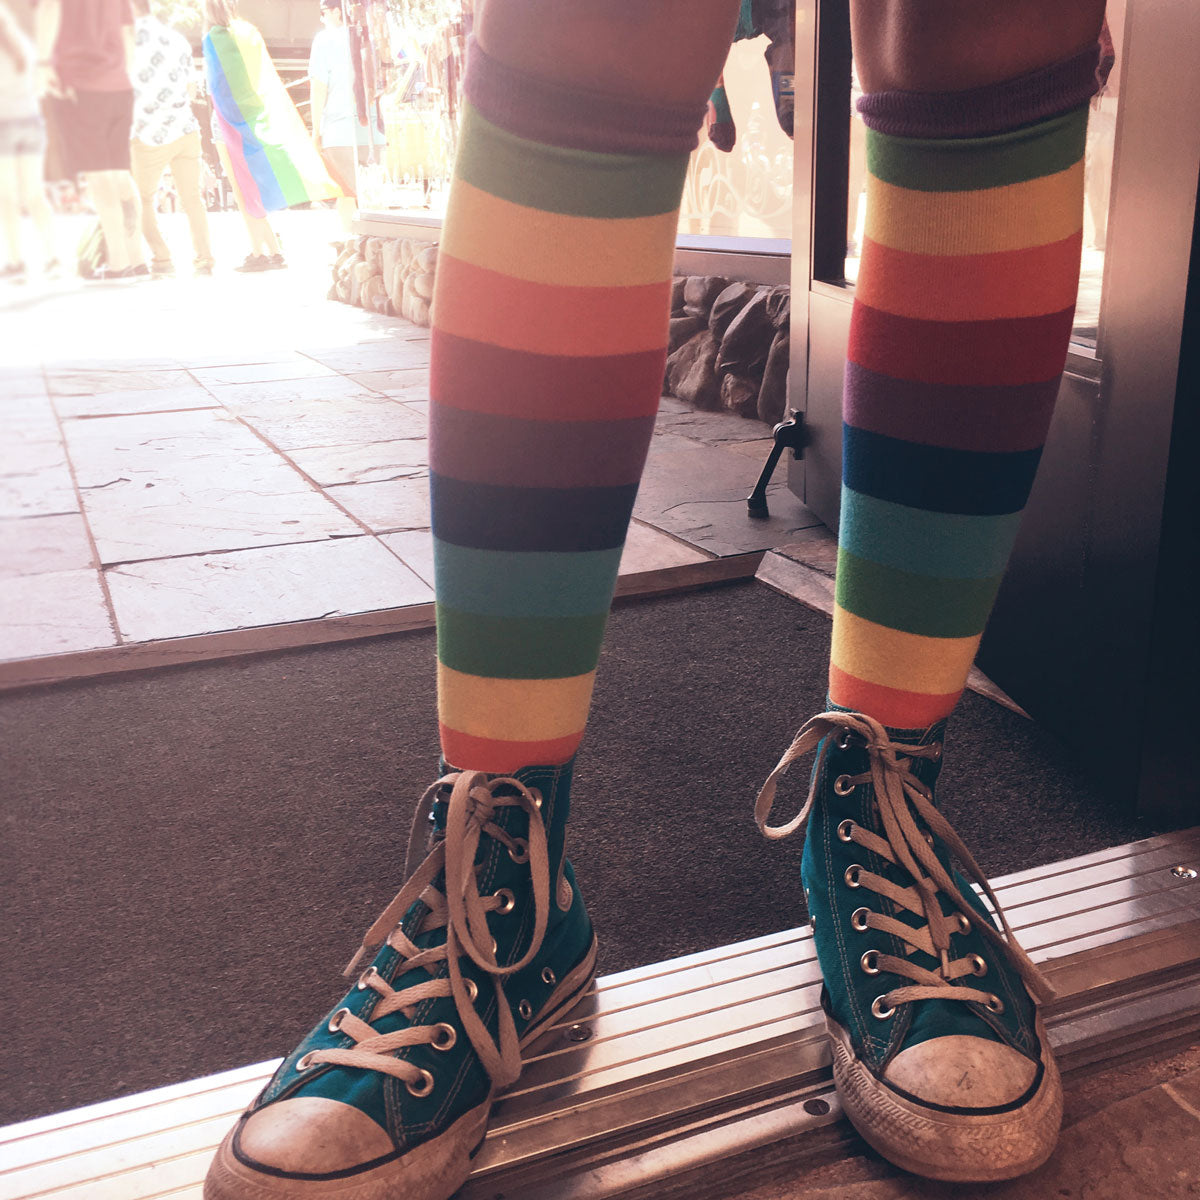 Take every step with pride in a pair of knee-high rainbow-striped socks, shown here worn with green Converse sneakers.